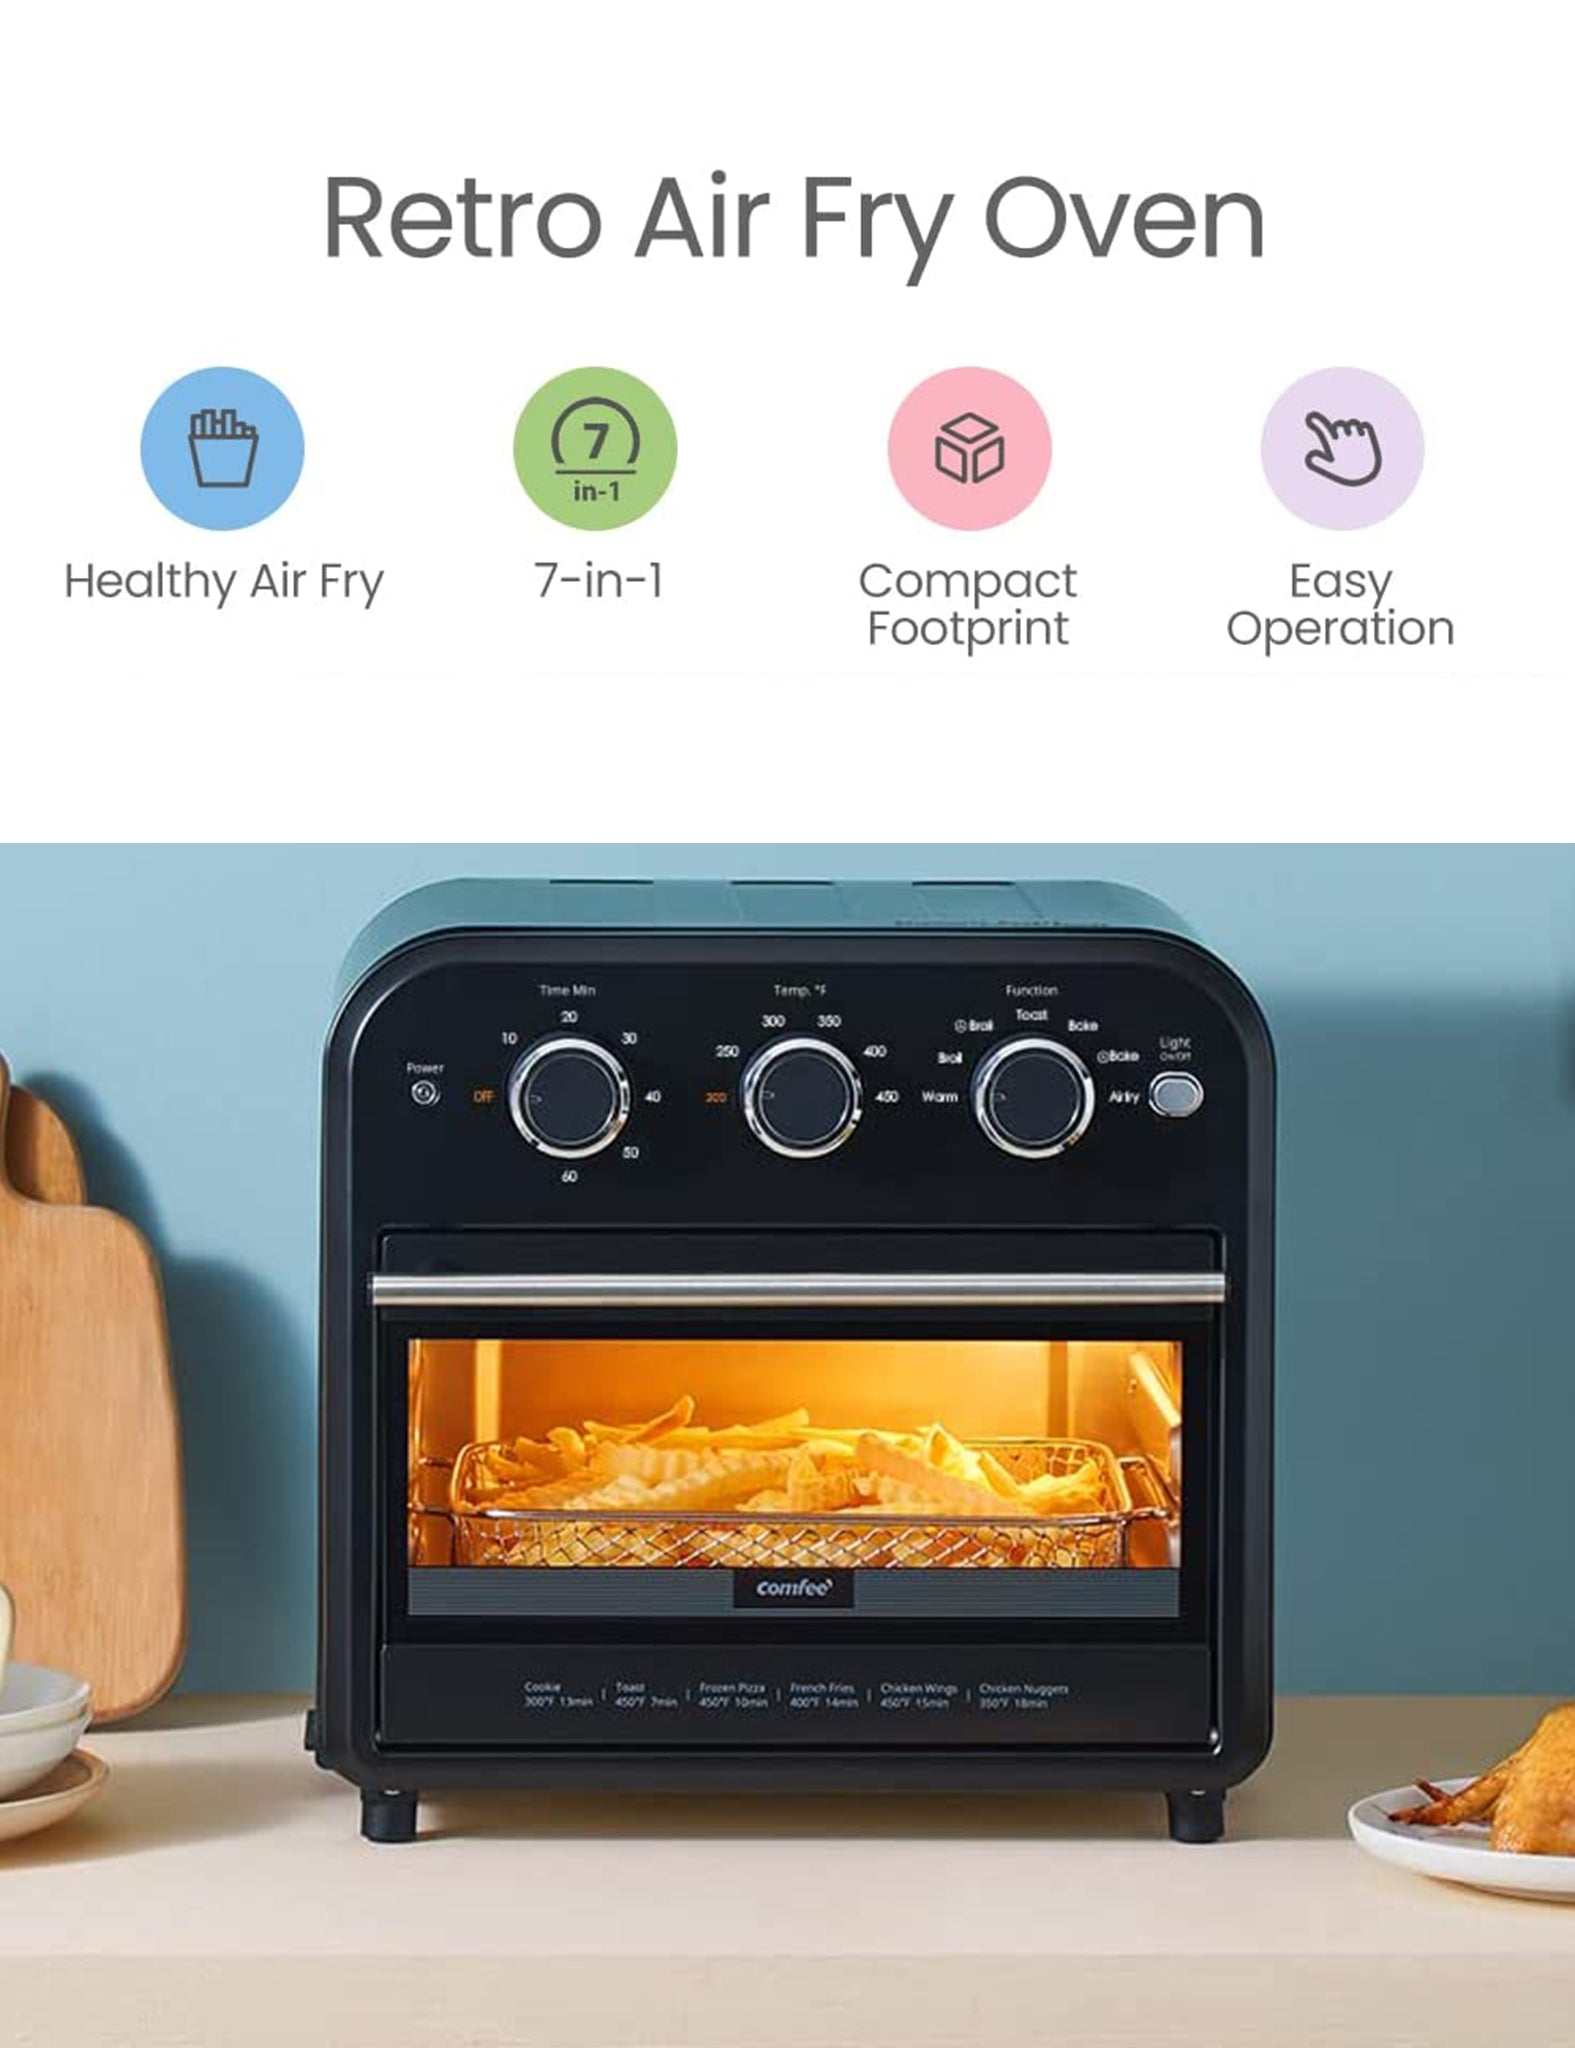 COMFEE Air Fryer Toaster Oven Combo FLASHWAVE Rapid-Heat Technology  Countertop Convection Oven with Bake Broil Roast, 6 Slices Large Capacity  Fits 12 Pizza 24QT, 4 Accessories 1750W Stainless Steel 